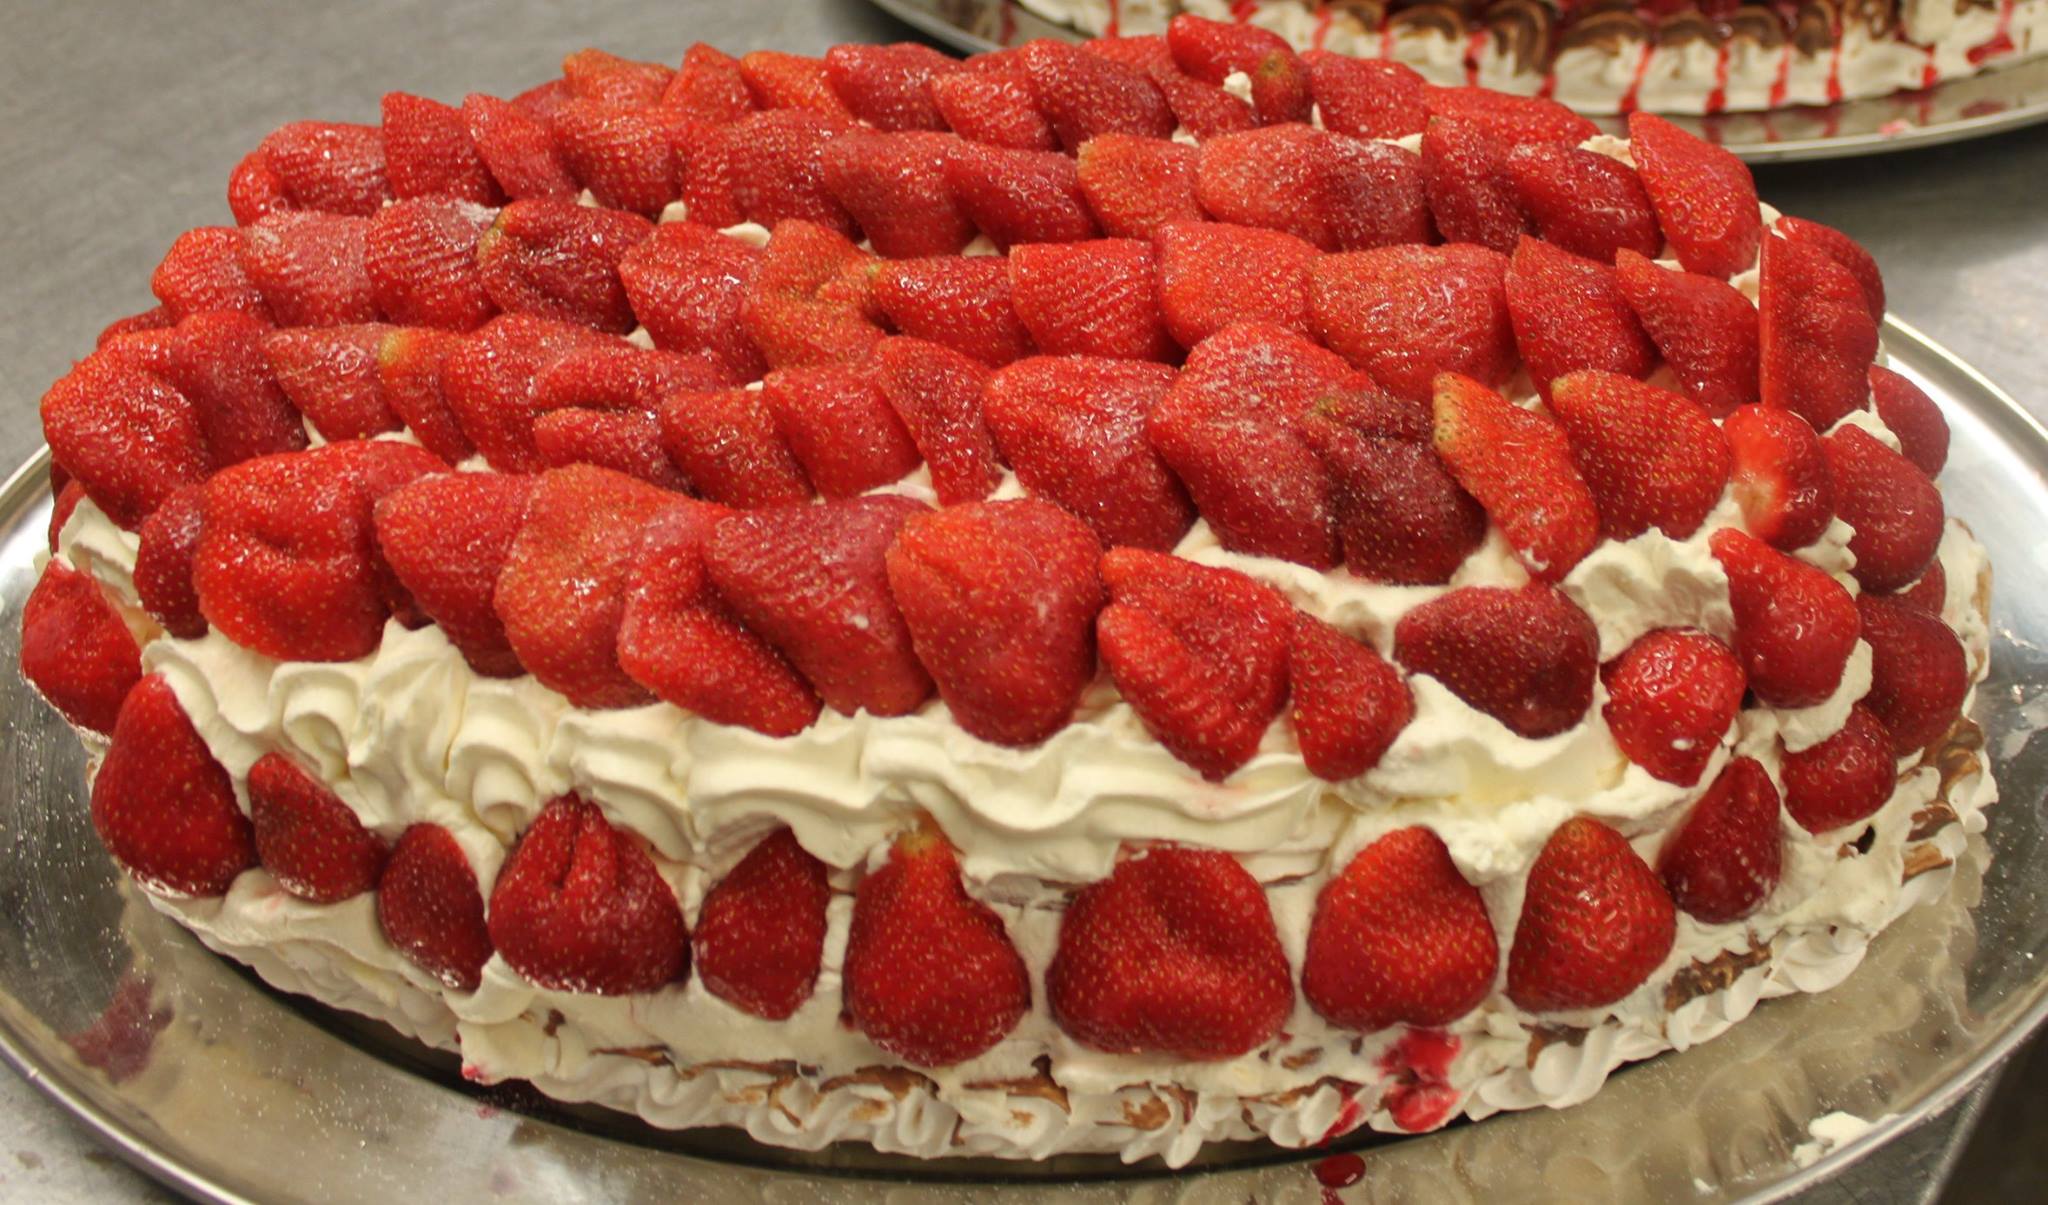 Here is our homemade strawberry and raspberry pavlova.